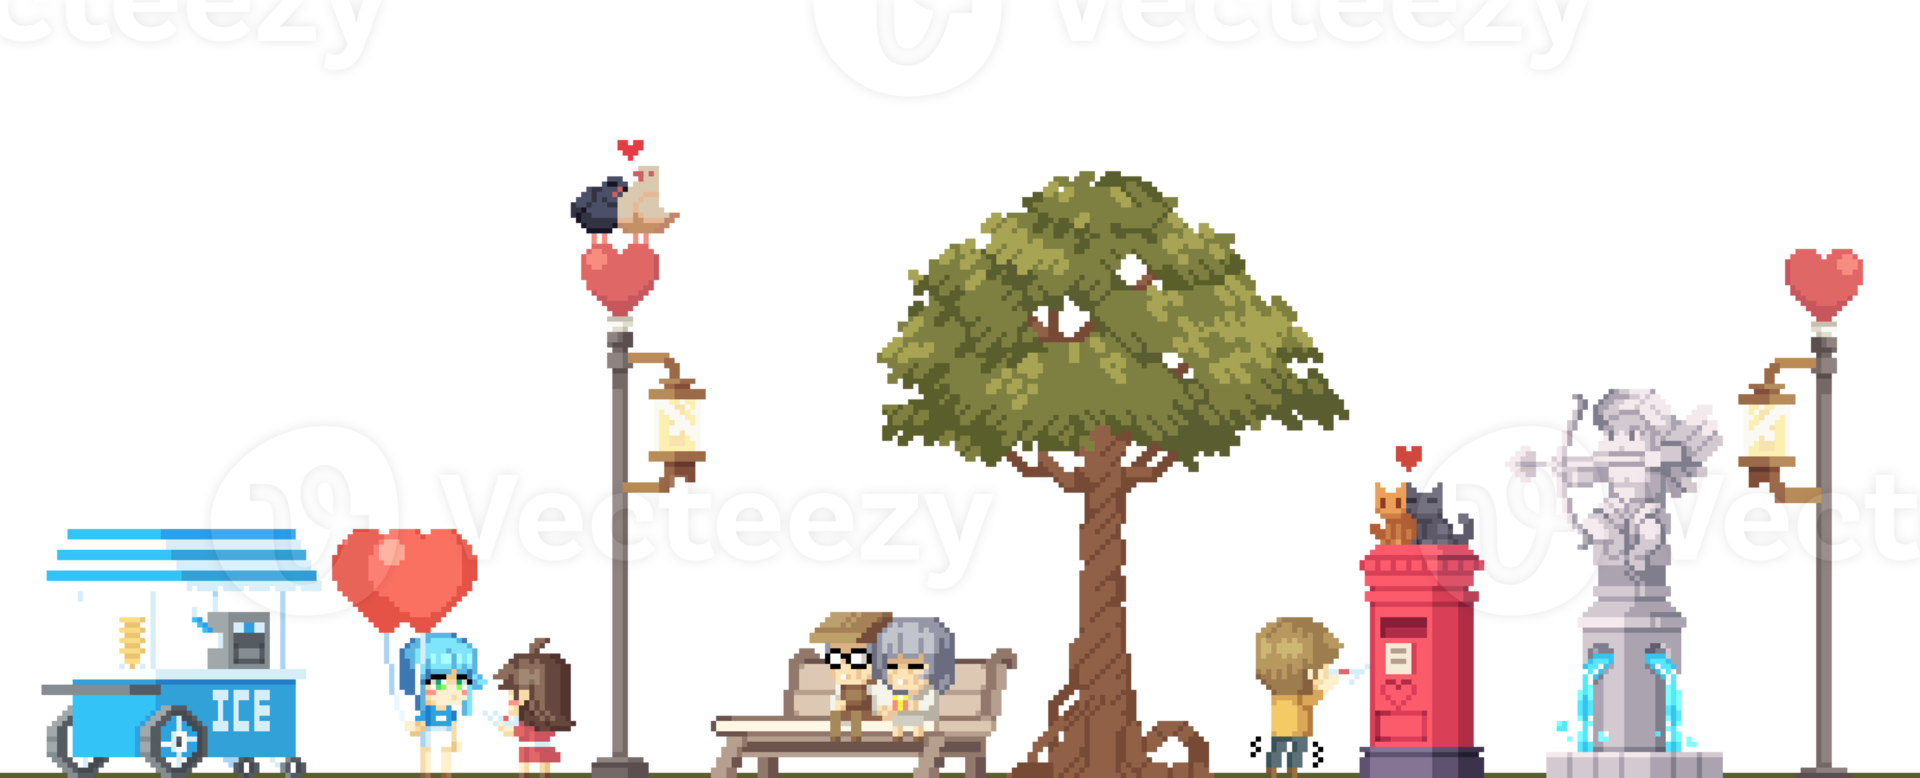 Pixel valentine's day. Street with decorations for Valentine's Day. Pixel park with people and animals. png